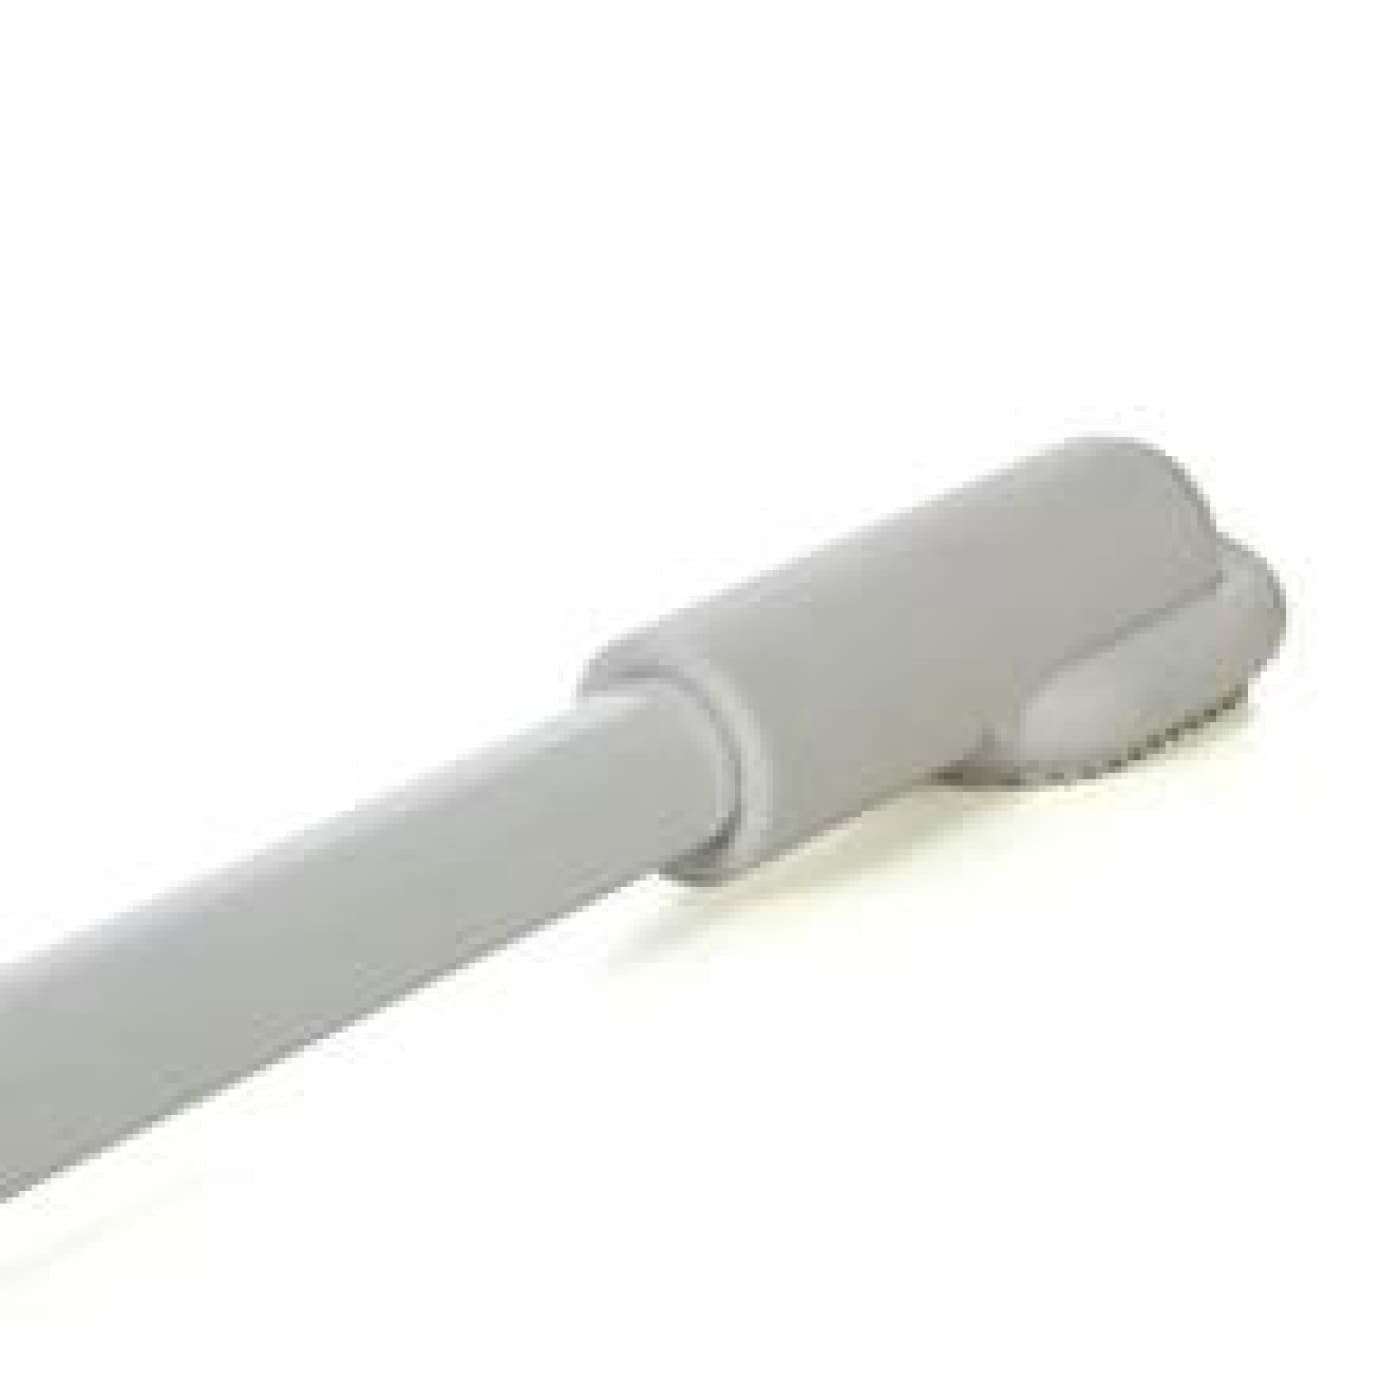 Veebee Bedguard Fixed - White - HEALTH & HOME SAFETY - BED RAILS